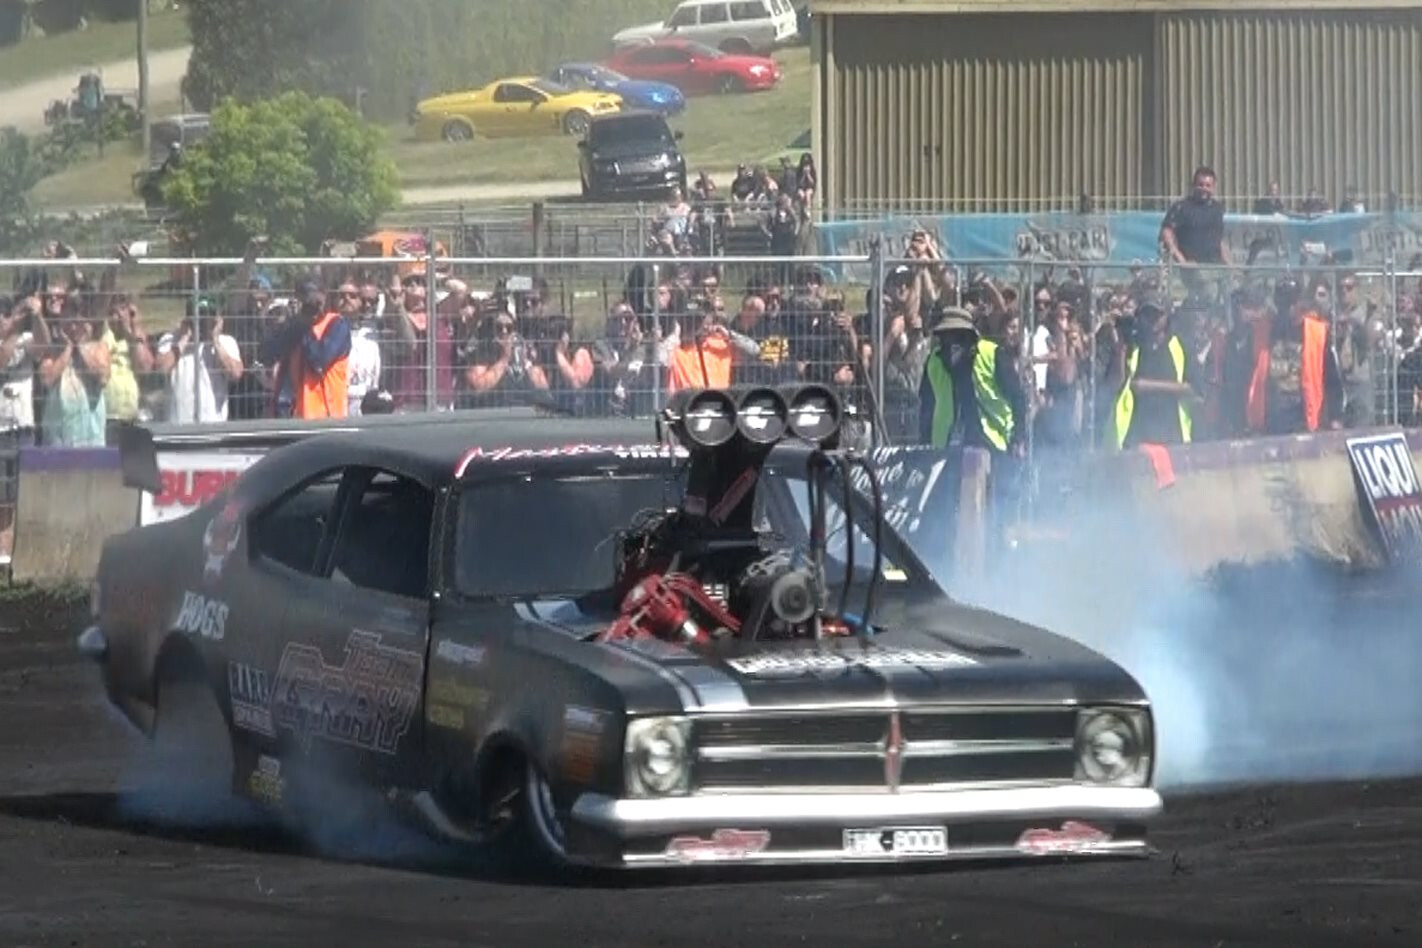 VIDEO: TOP FUEL BURNOUT AT TREAD CEMETERY